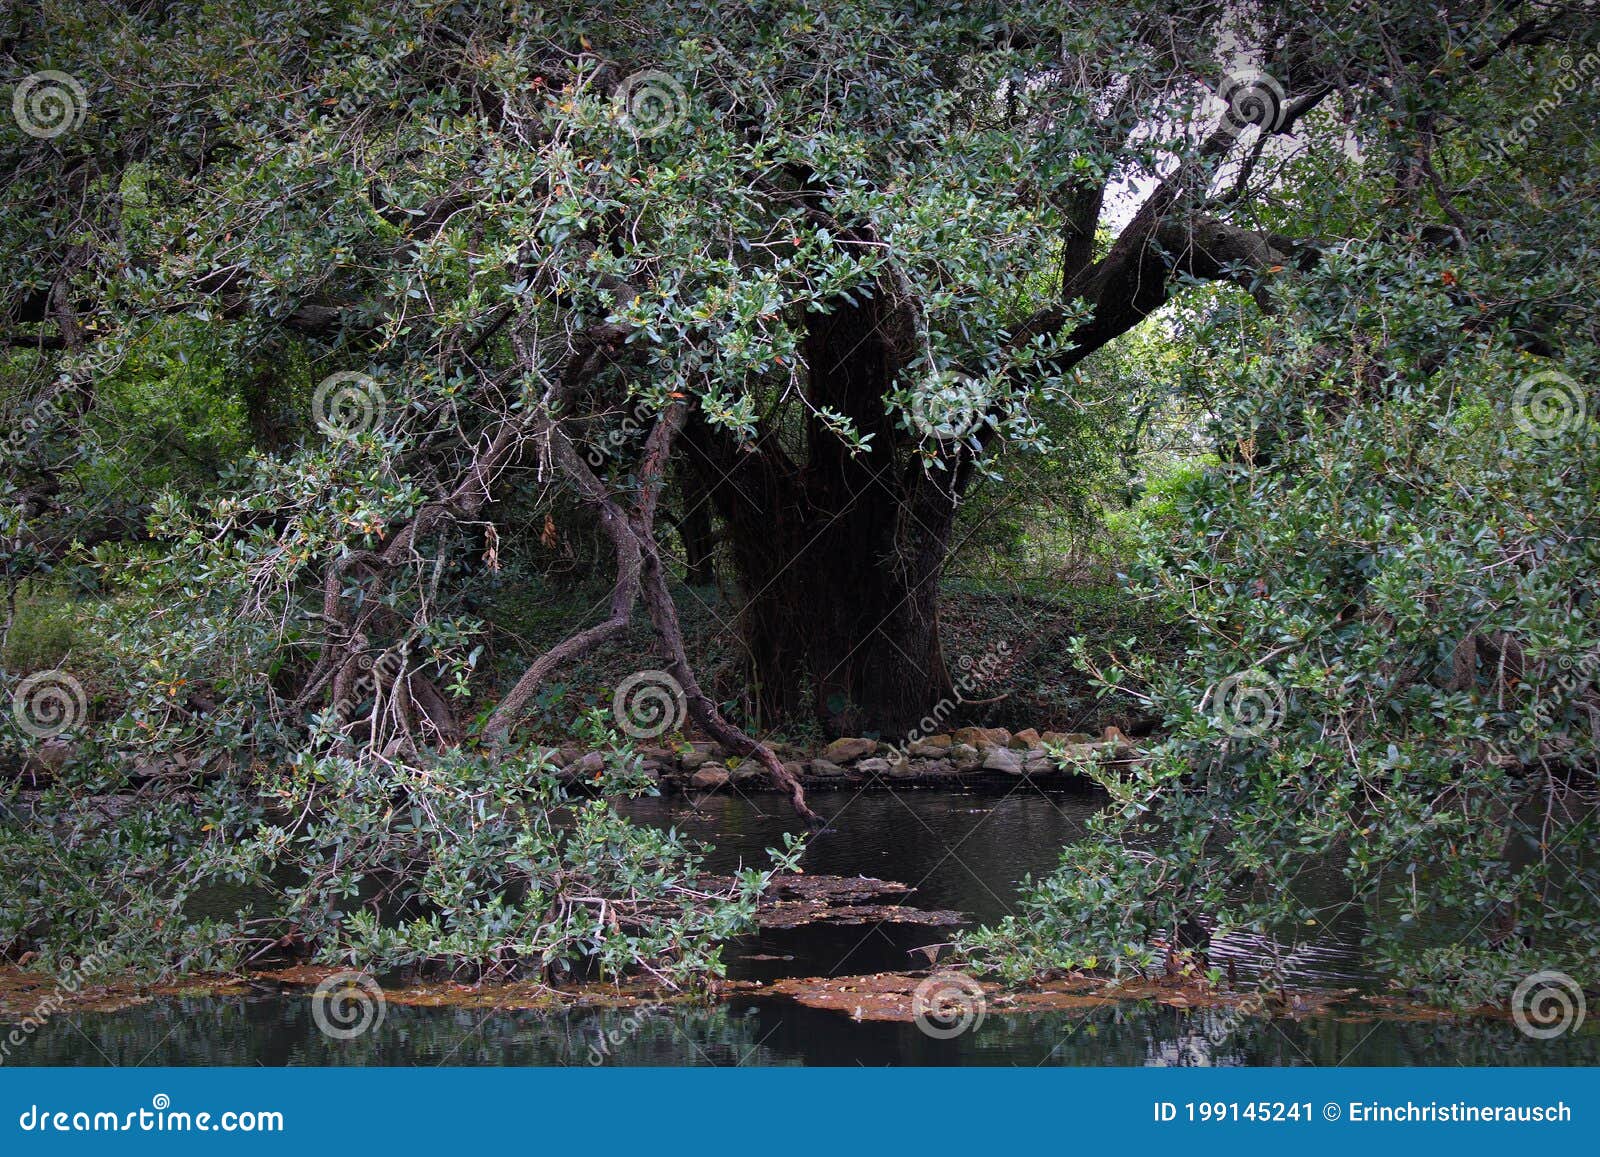 This Old Oak Tree is Embracing the Water Stock Image - Image of